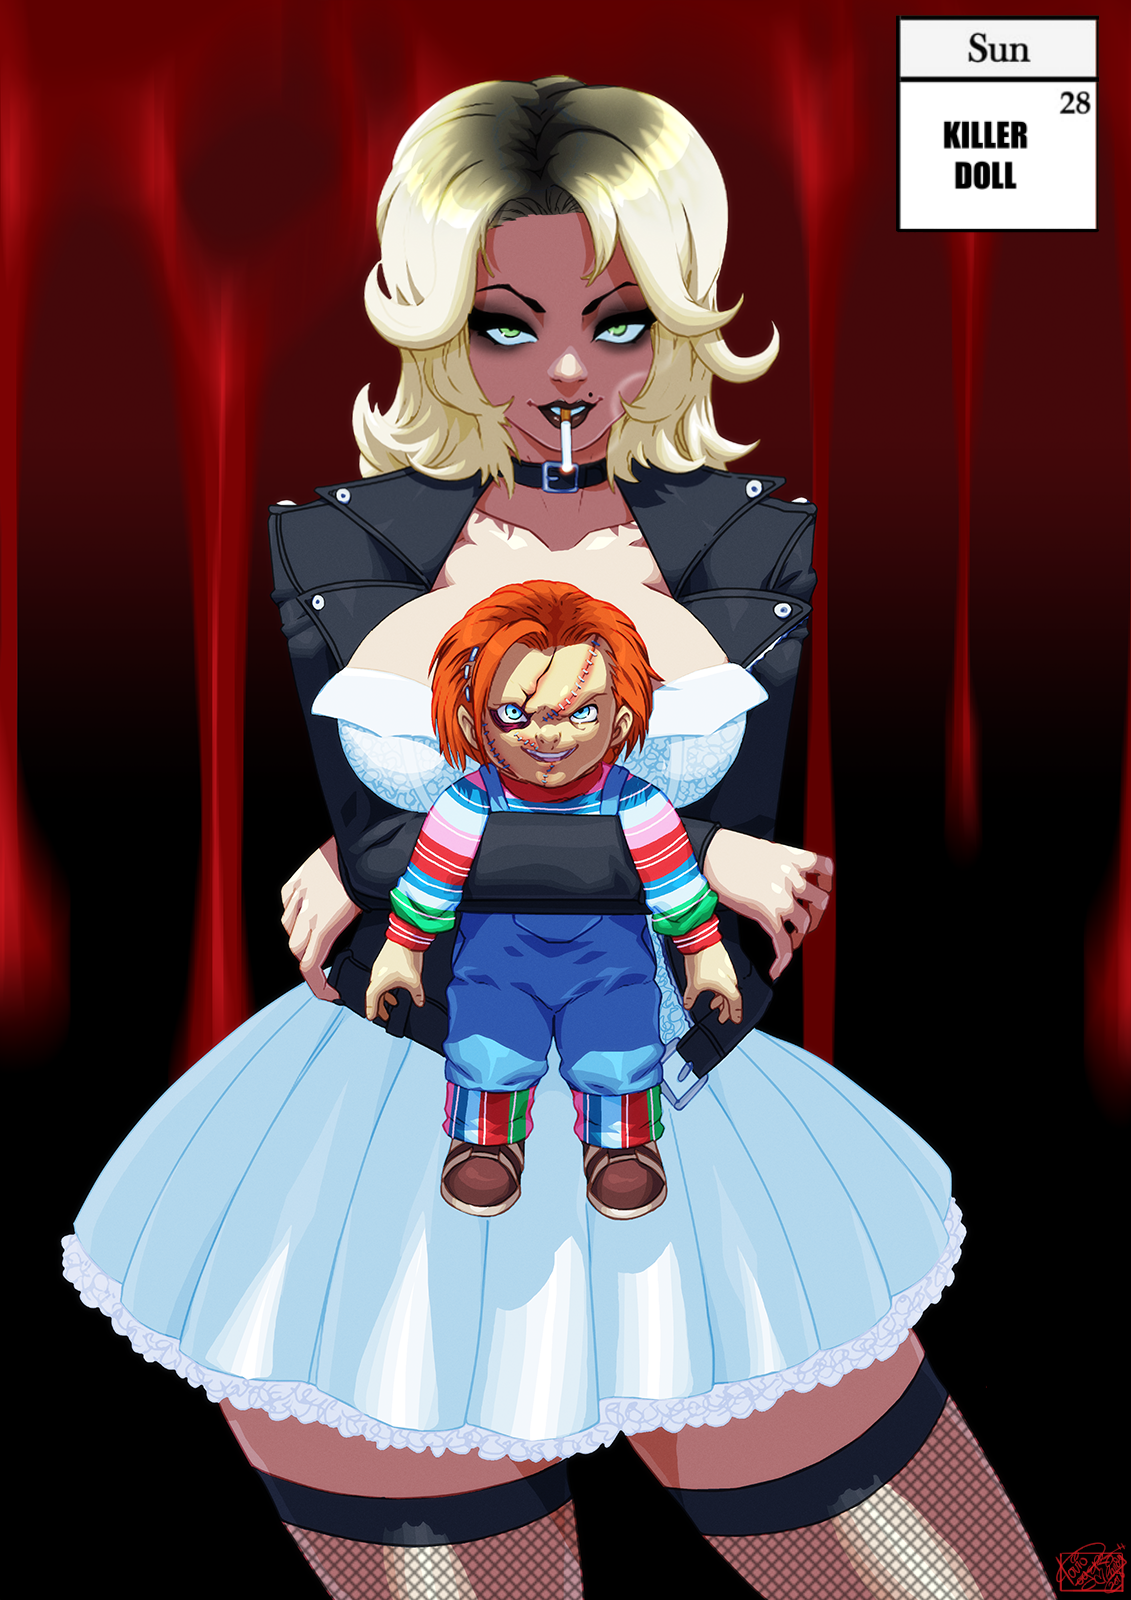 tovio-rogers:  day 28 of the monstober drawing challenge https://goo.gl/GNAmfg #brideofchucky